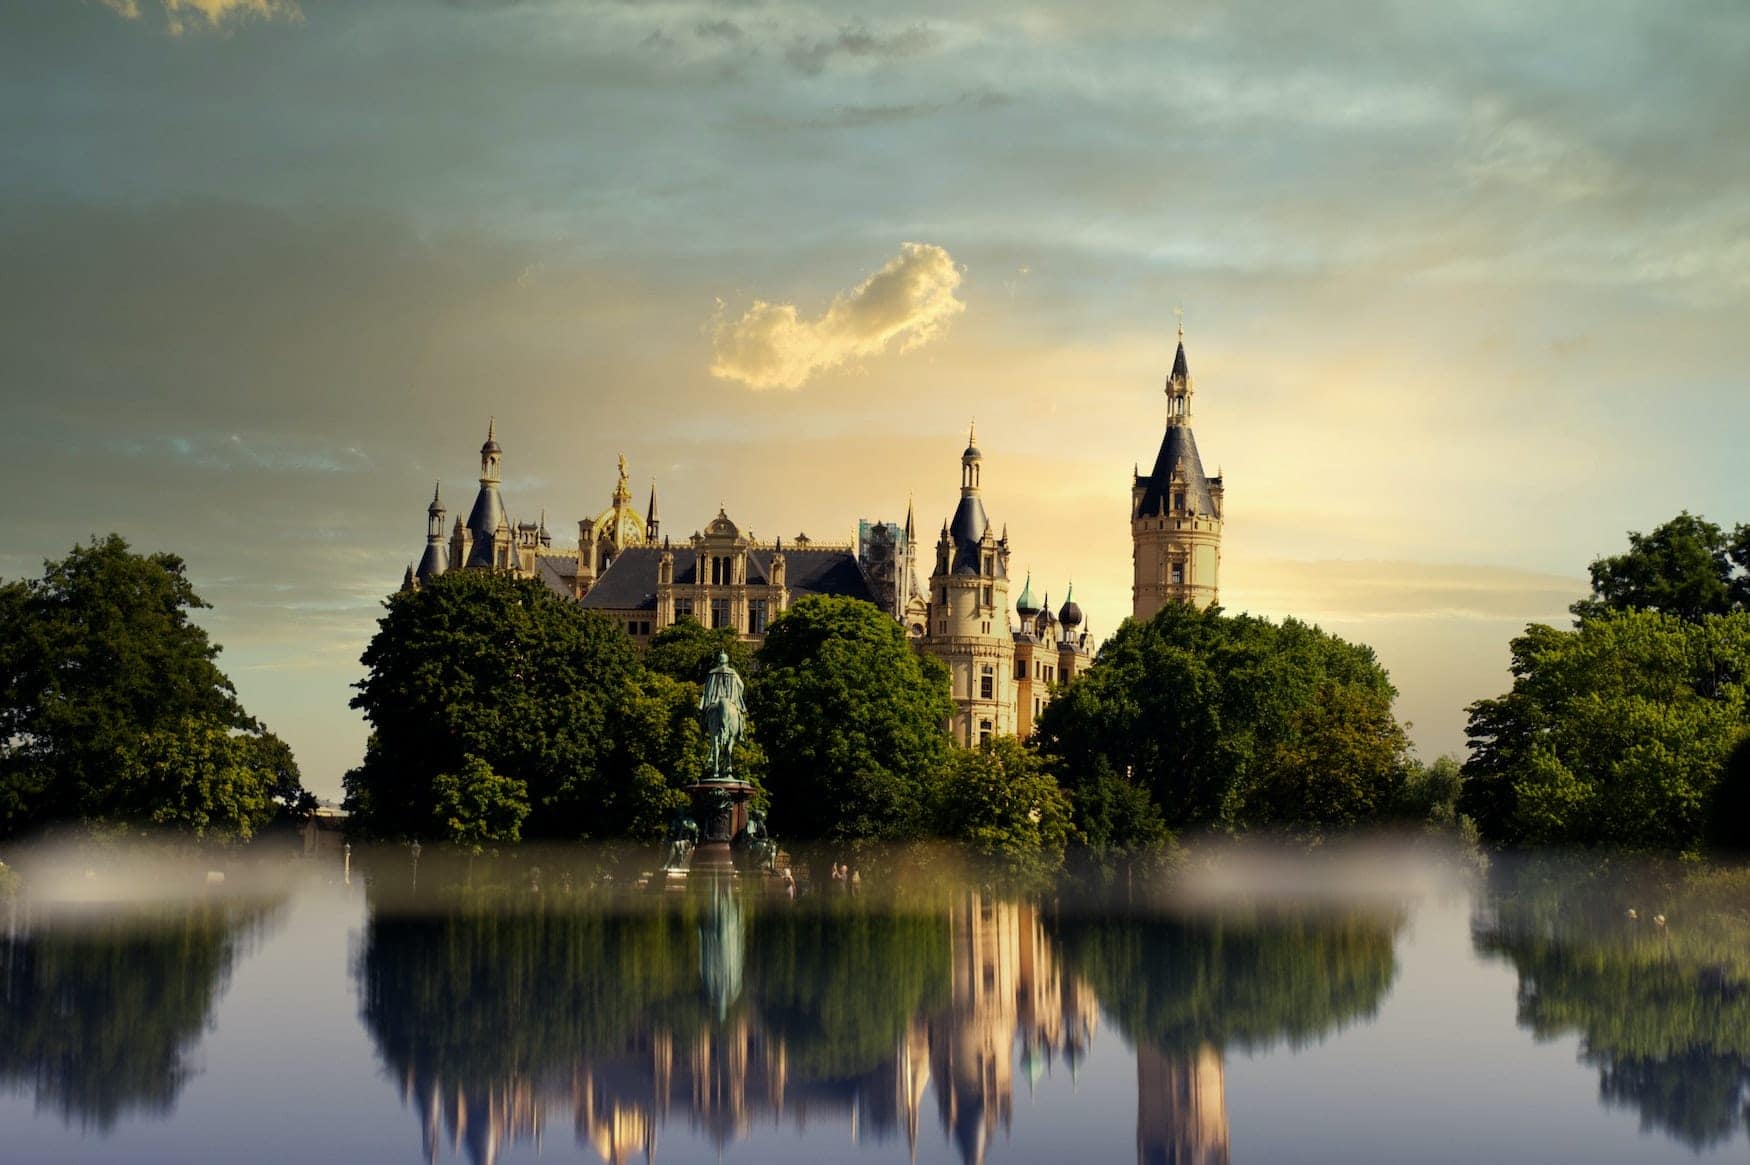 One of the top travel destinations in Germany is Schwerin Castle